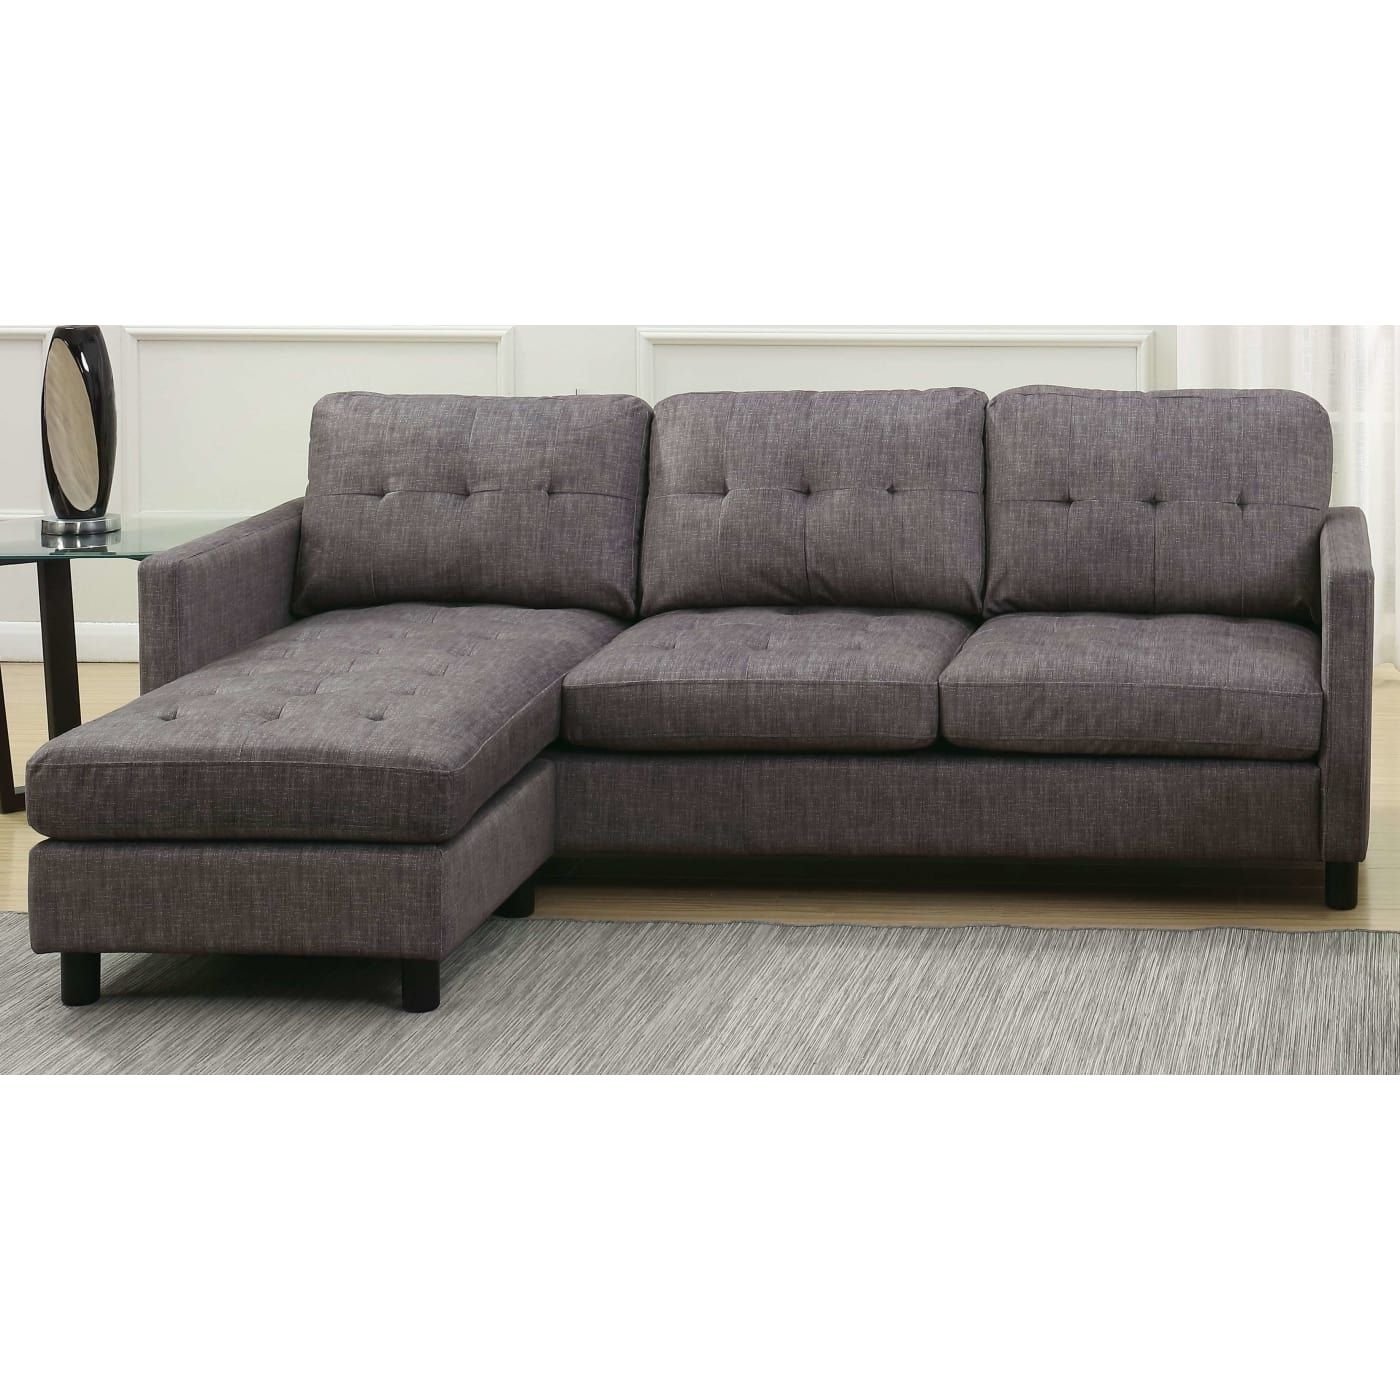 3 Piece Sectional Sofa With Chaise Reviews | Baci Living Room With Malbry Point 3 Piece Sectionals With Raf Chaise (View 22 of 30)